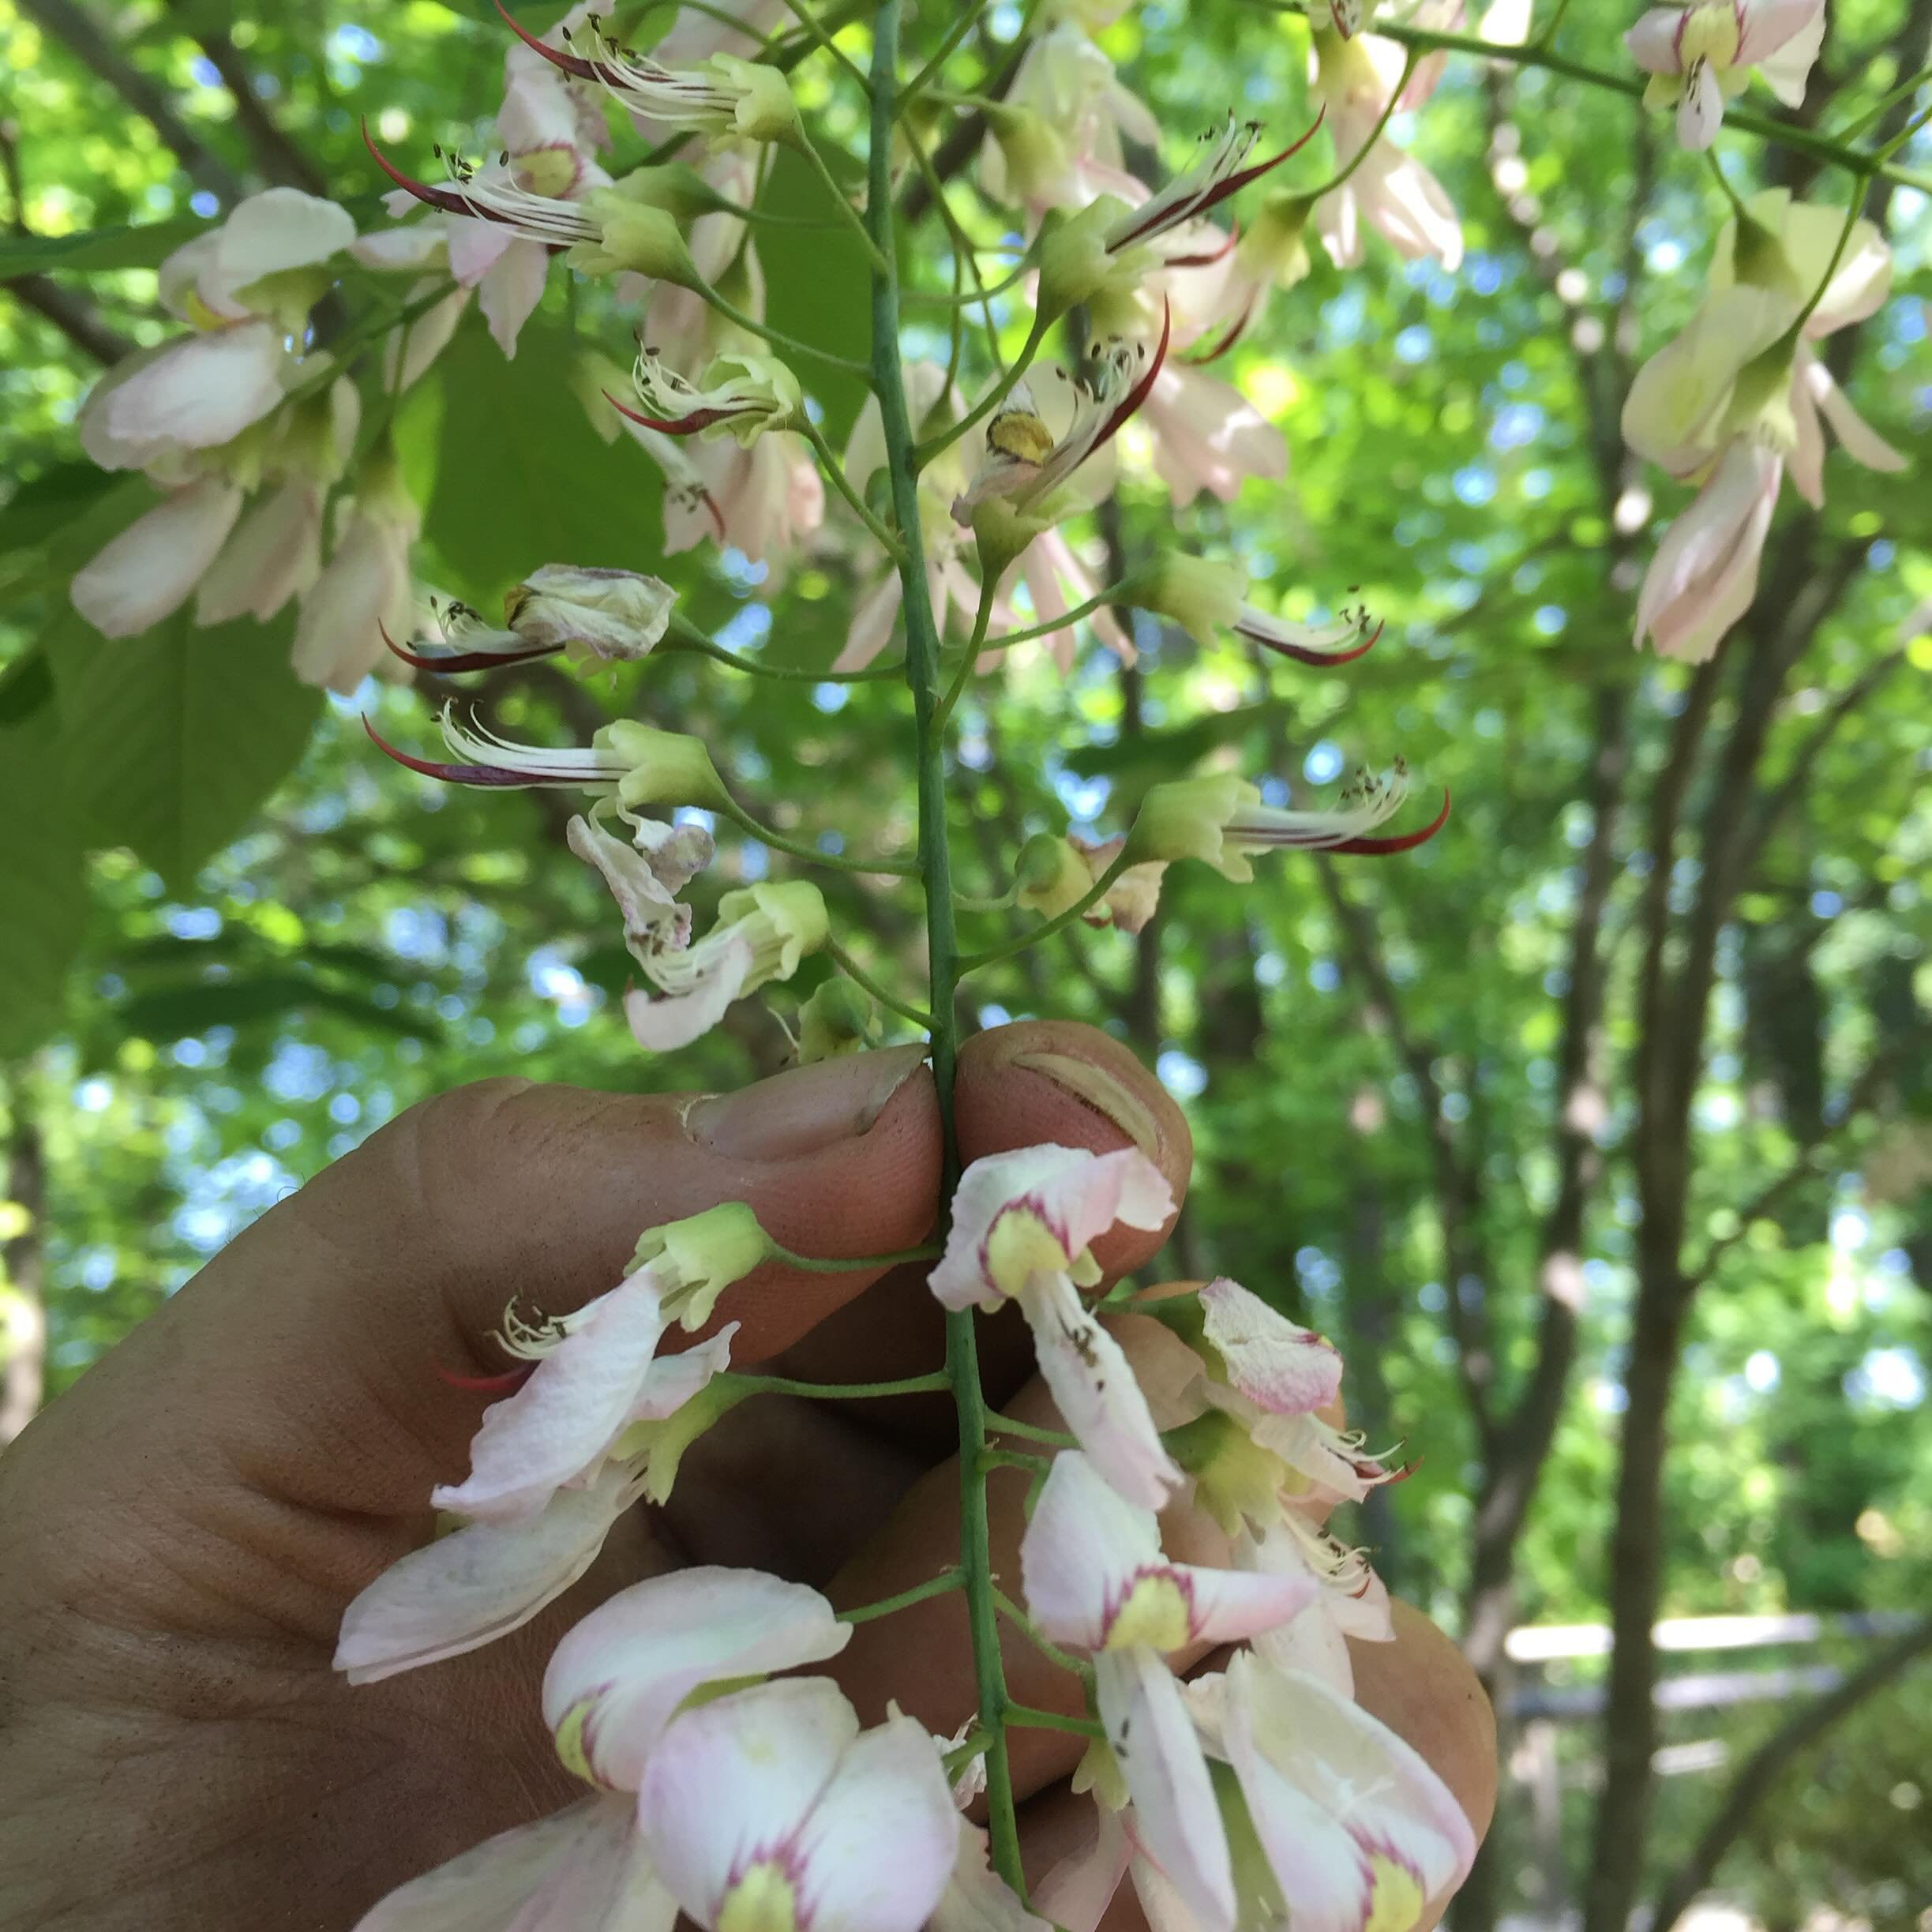 &ldquo;Lucky find today: stumbled upon this Kentucky Yellowwood (Cledrastis kentukea) on a property! Its rarity only enhances its beauty. Let&rsquo;s pledge to cherish and protect these invaluable treasures of nature for generations to come. #ArborCa